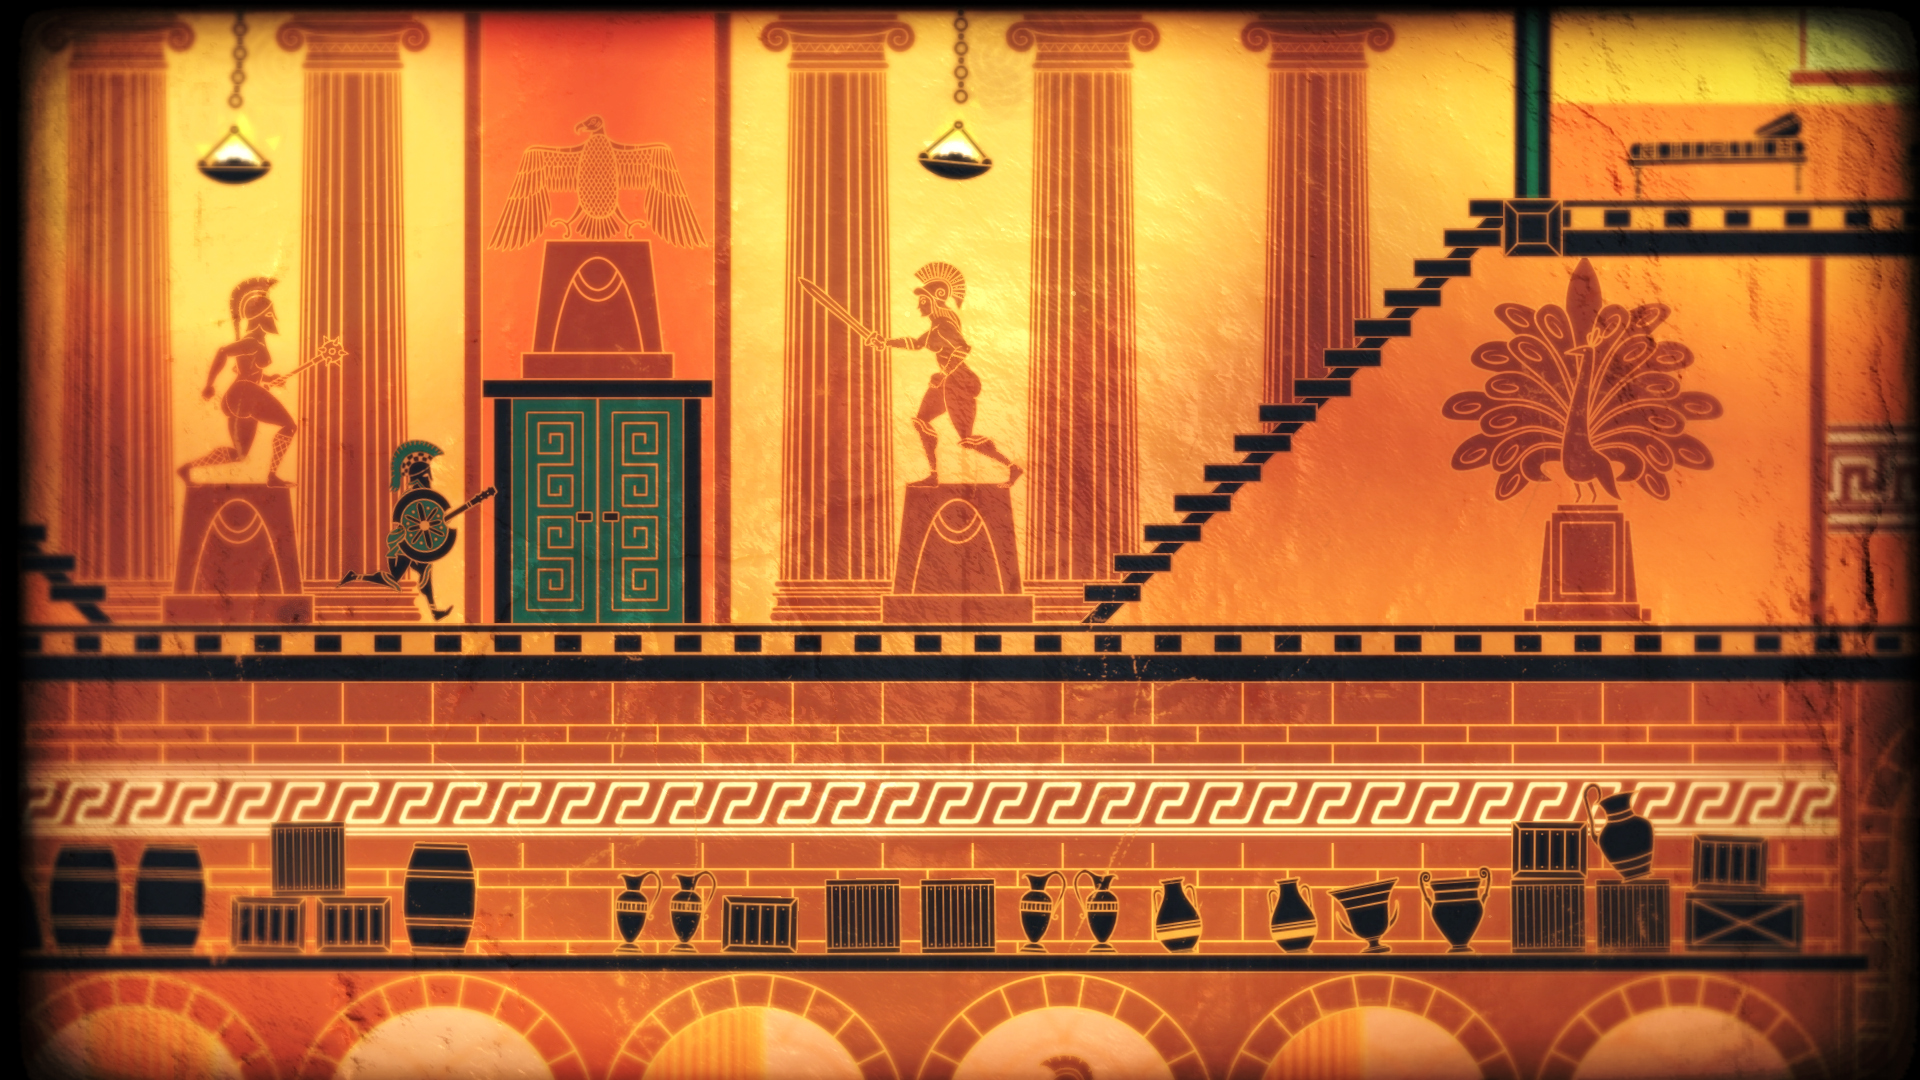 HQ Apotheon Wallpapers | File 1457.18Kb